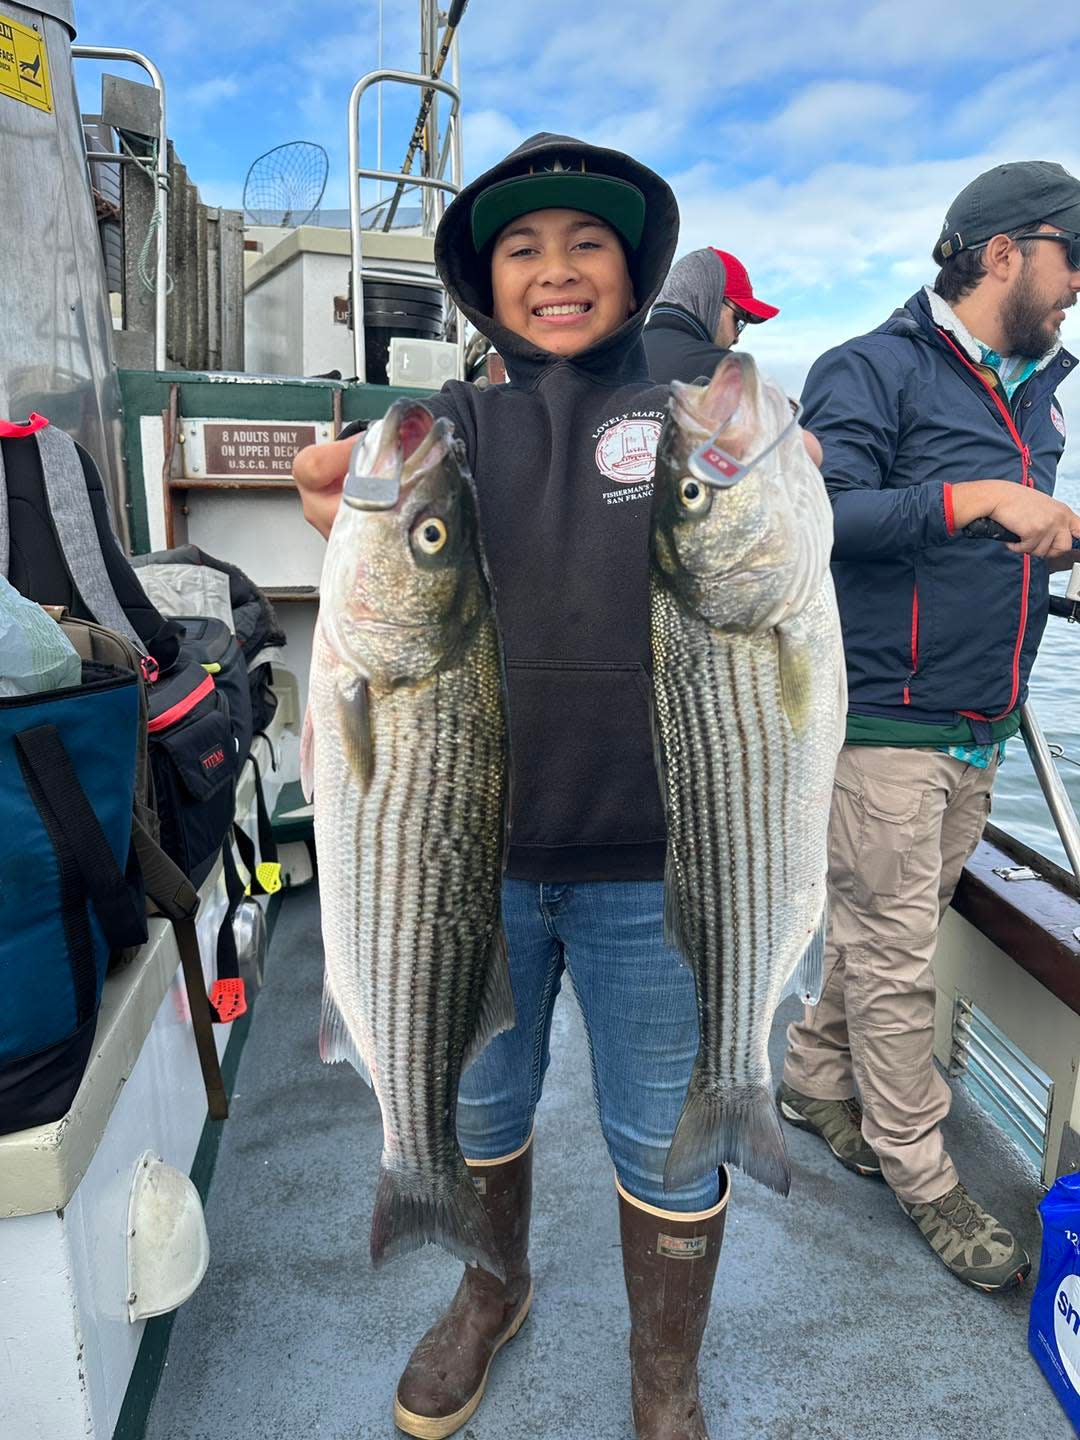 Striped bass fishing has been superb on San Francisco Bay over the past month. This angler shows off a limit of striped bass caught while drifting live anchovies in the bay aboard the Lovely Martha this October.